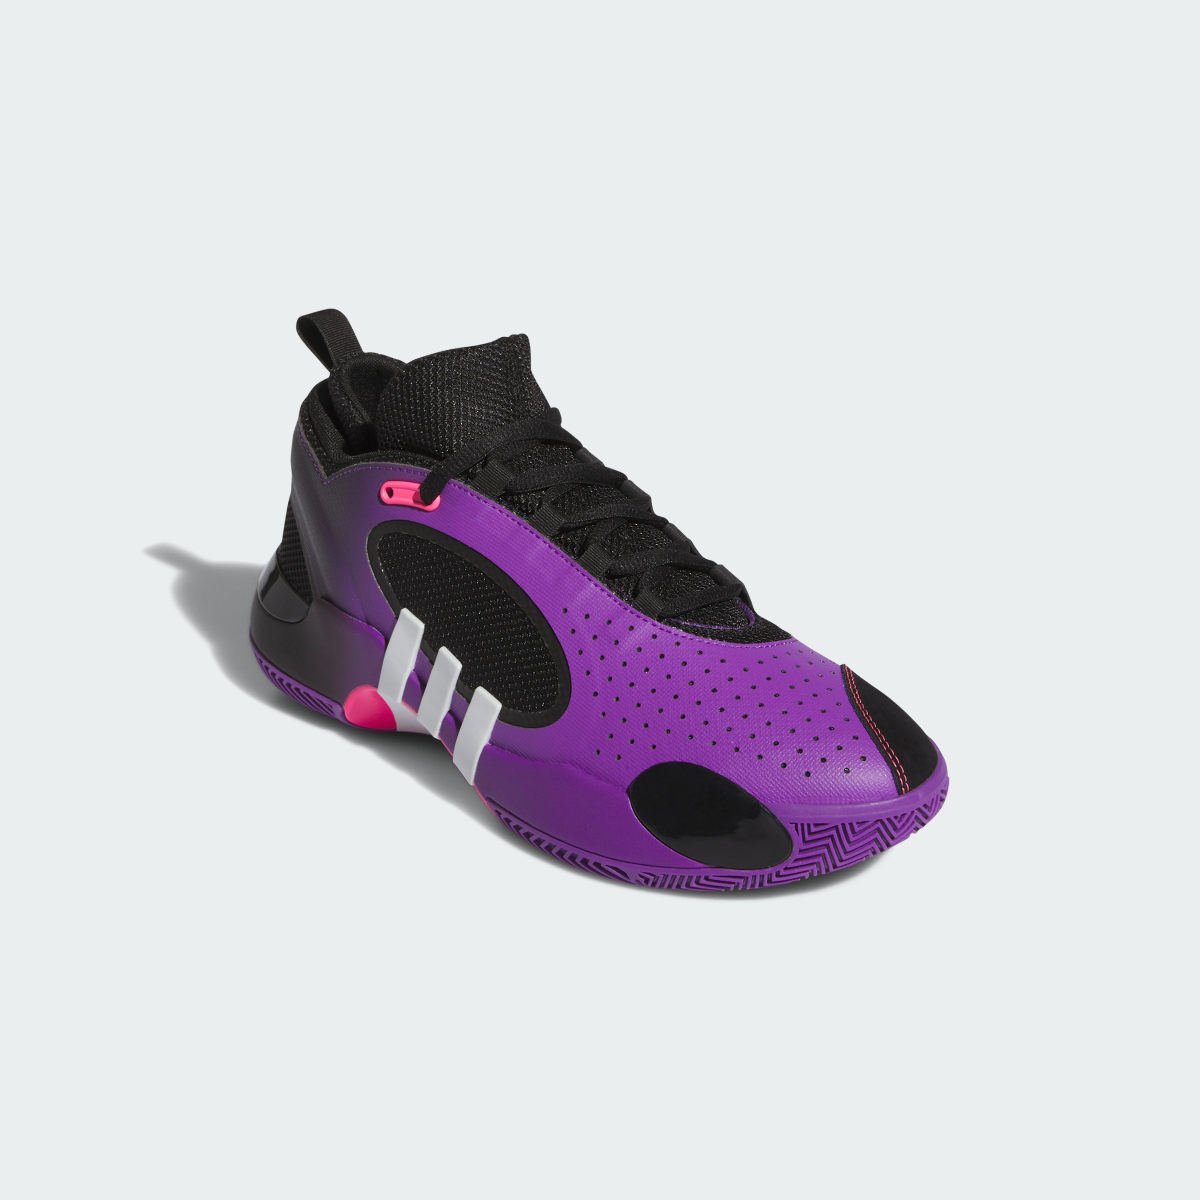 Adidas D.O.N. Issue 5 Basketball Shoes. 5